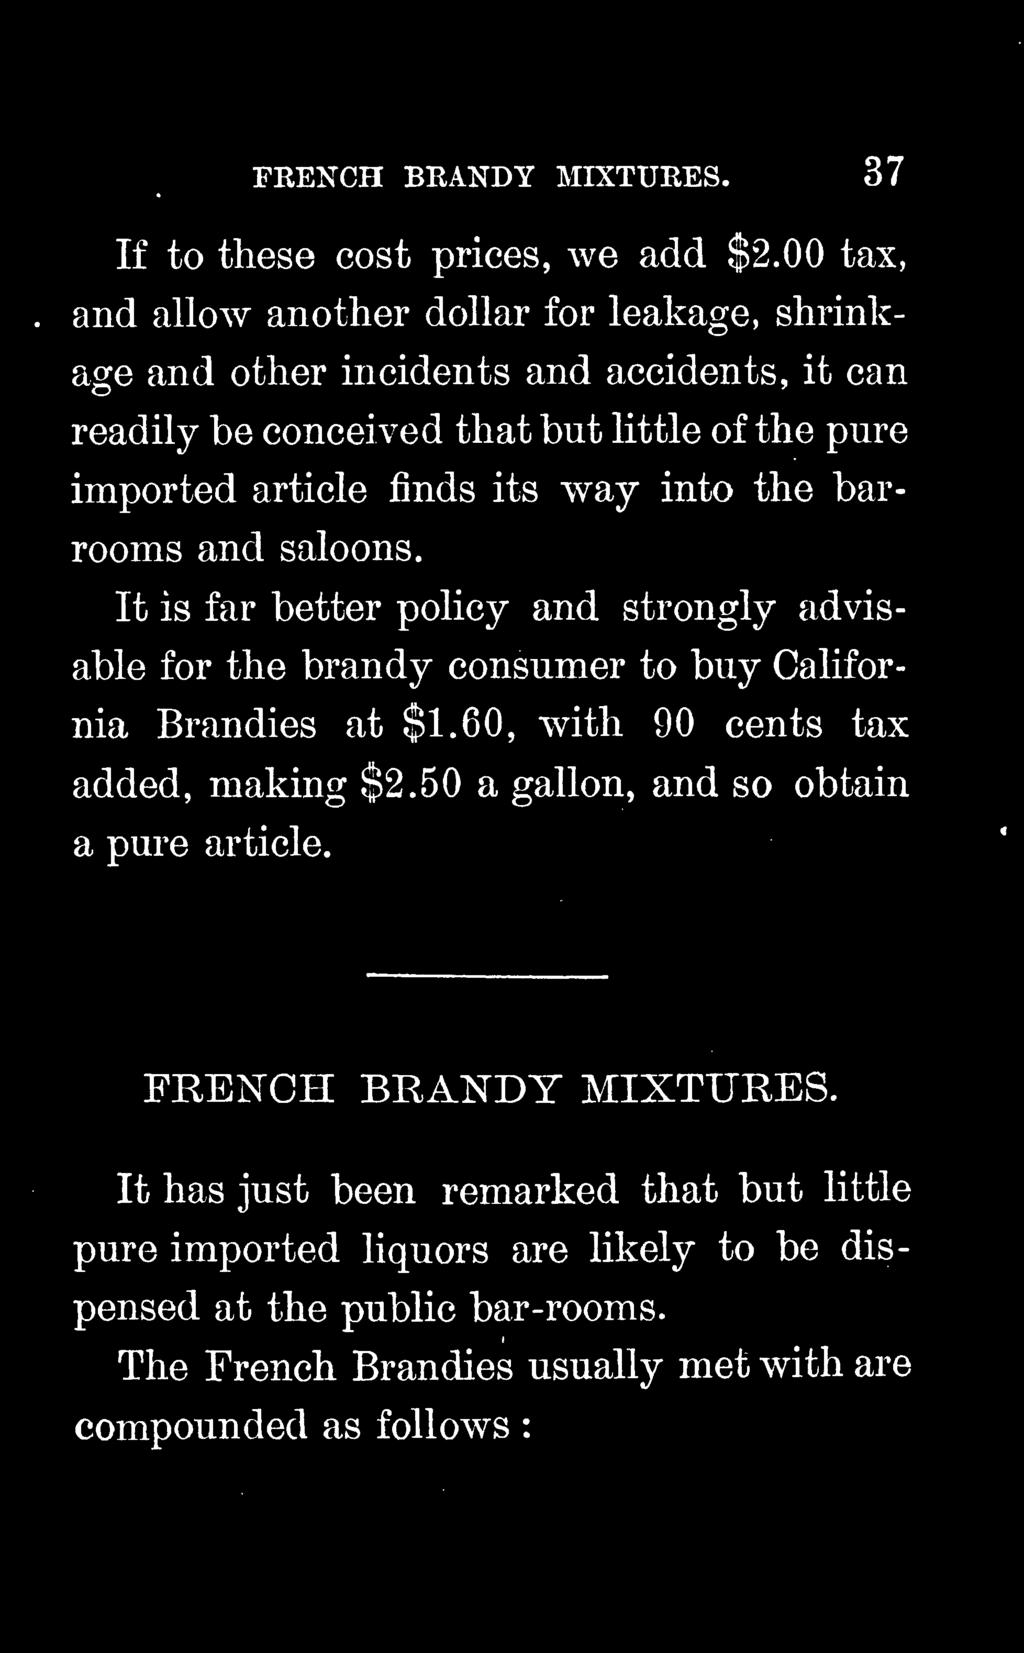 60, with 90 cents tax added, making $2.50 a gallon, and so obtain a pure article. FRENCH BRANDY MIXTURES.